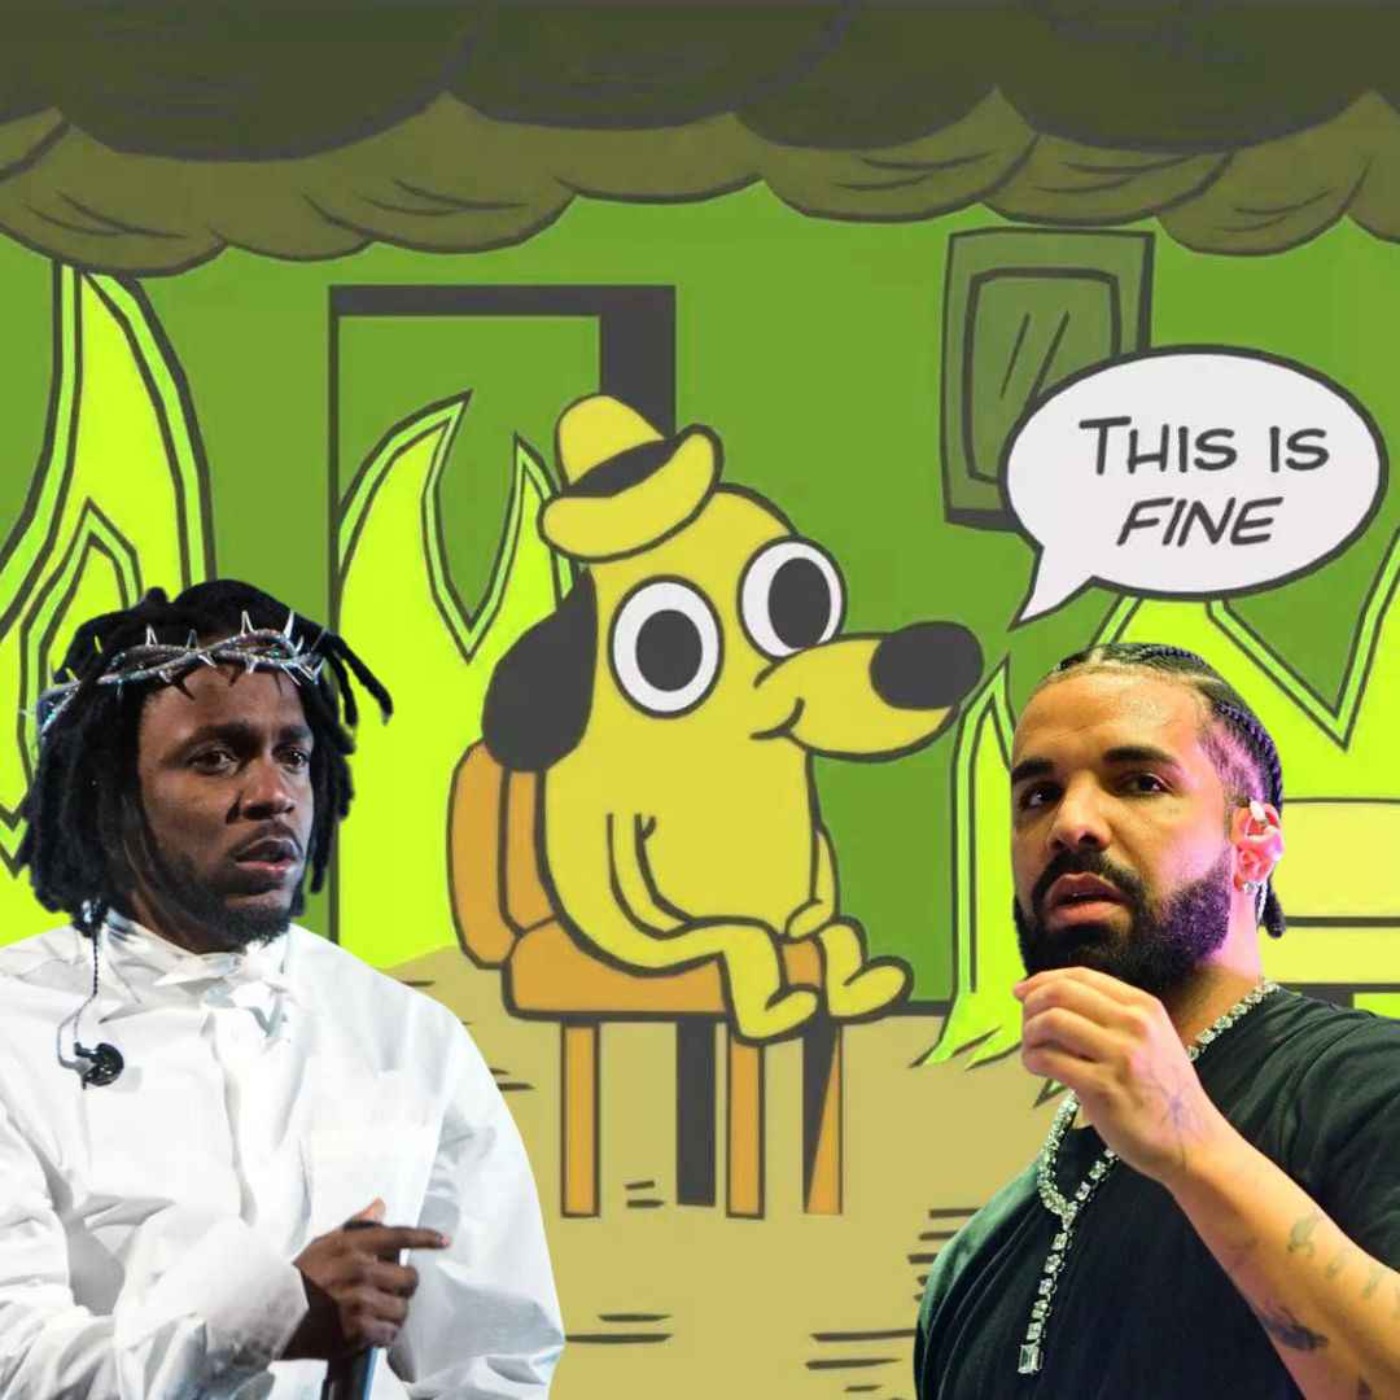 cover art for drake vs. kendrick: the battle over allegations of grooming and underage girls in the digital age [ad-free premium]